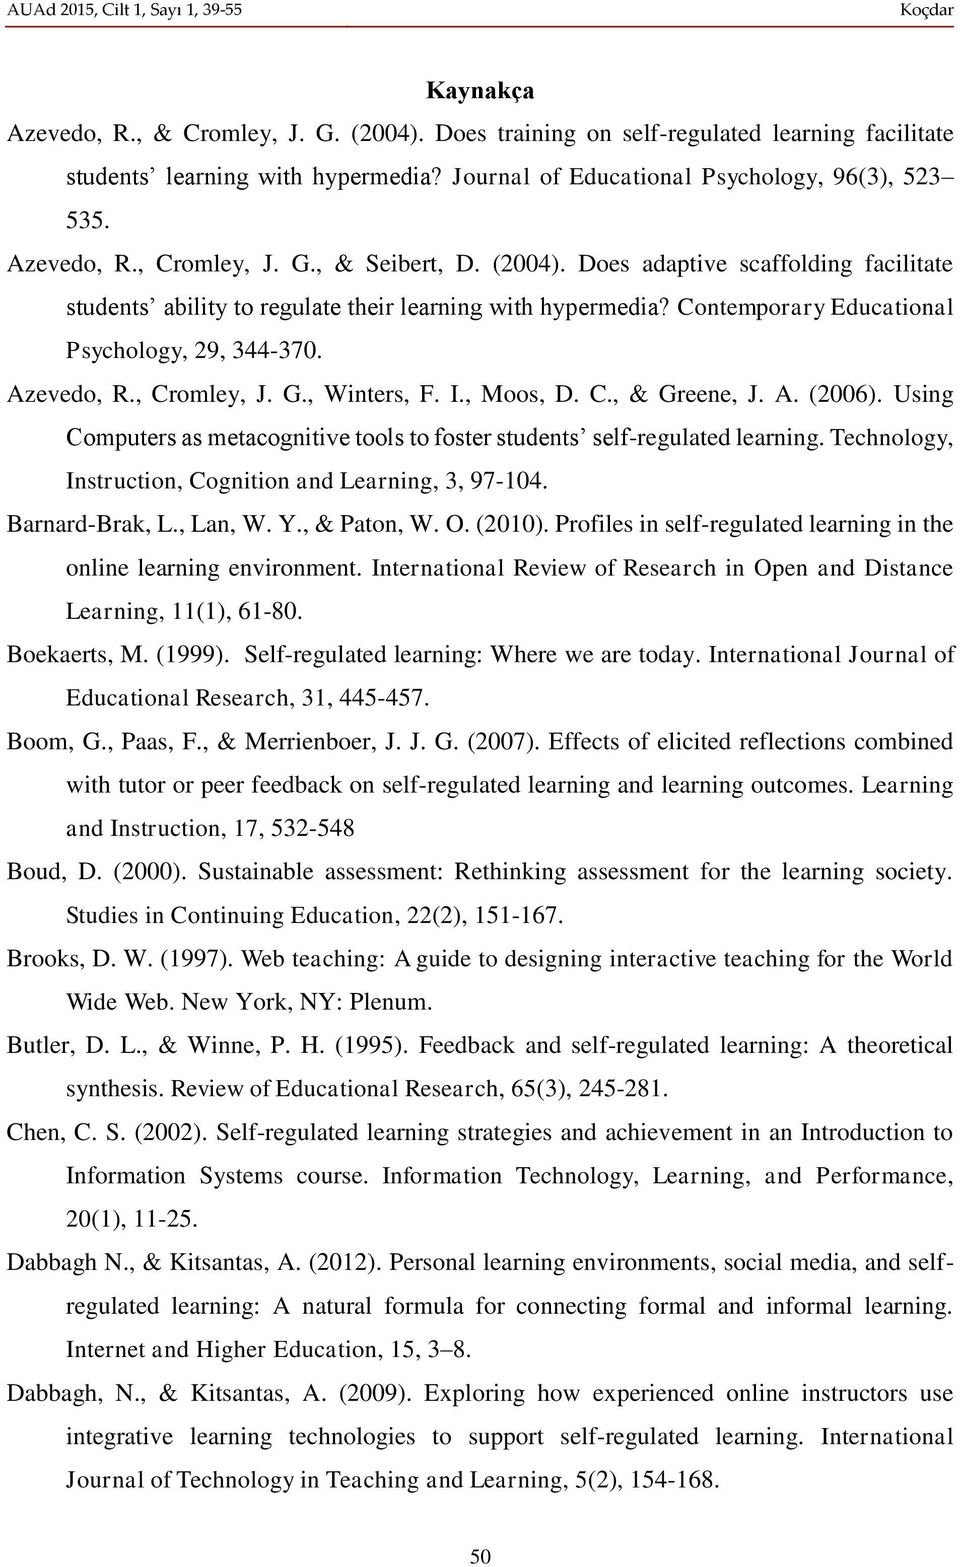 G., Winters, F. I., Moos, D. C., & Greene, J. A. (2006). Using Computers as metacognitive tools to foster students self-regulated learning. Technology, Instruction, Cognition and Learning, 3, 97-104.